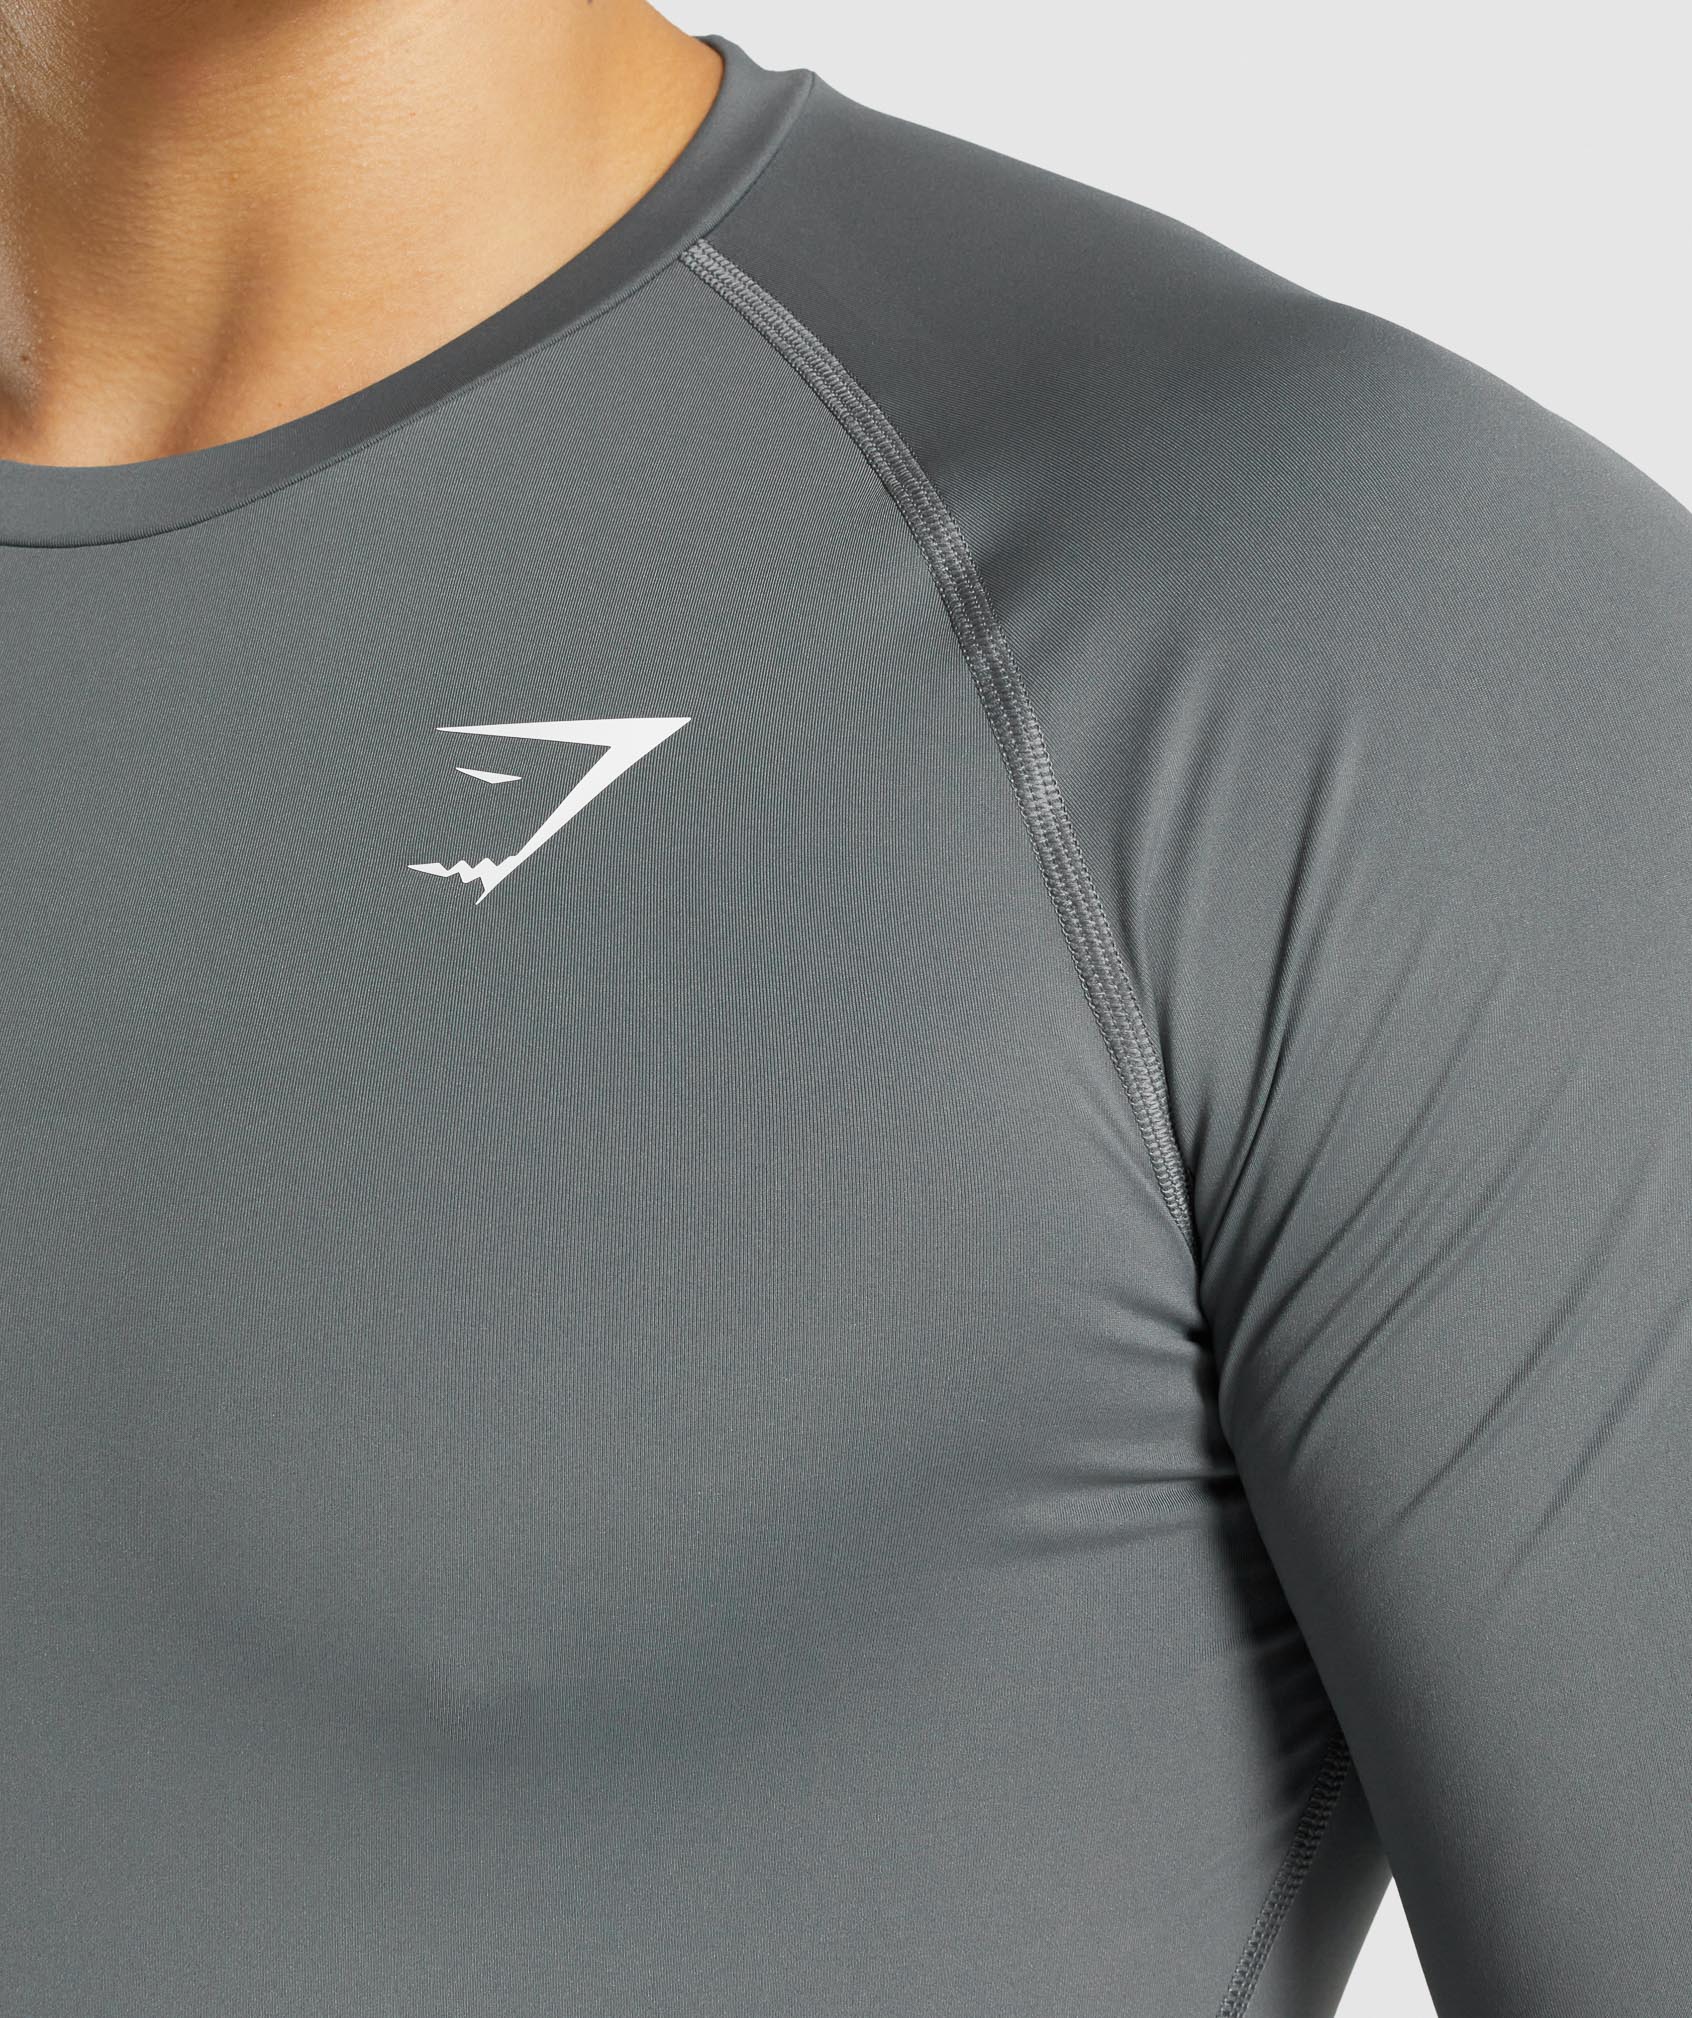 Element Baselayer T-Shirt in Charcoal - view 6